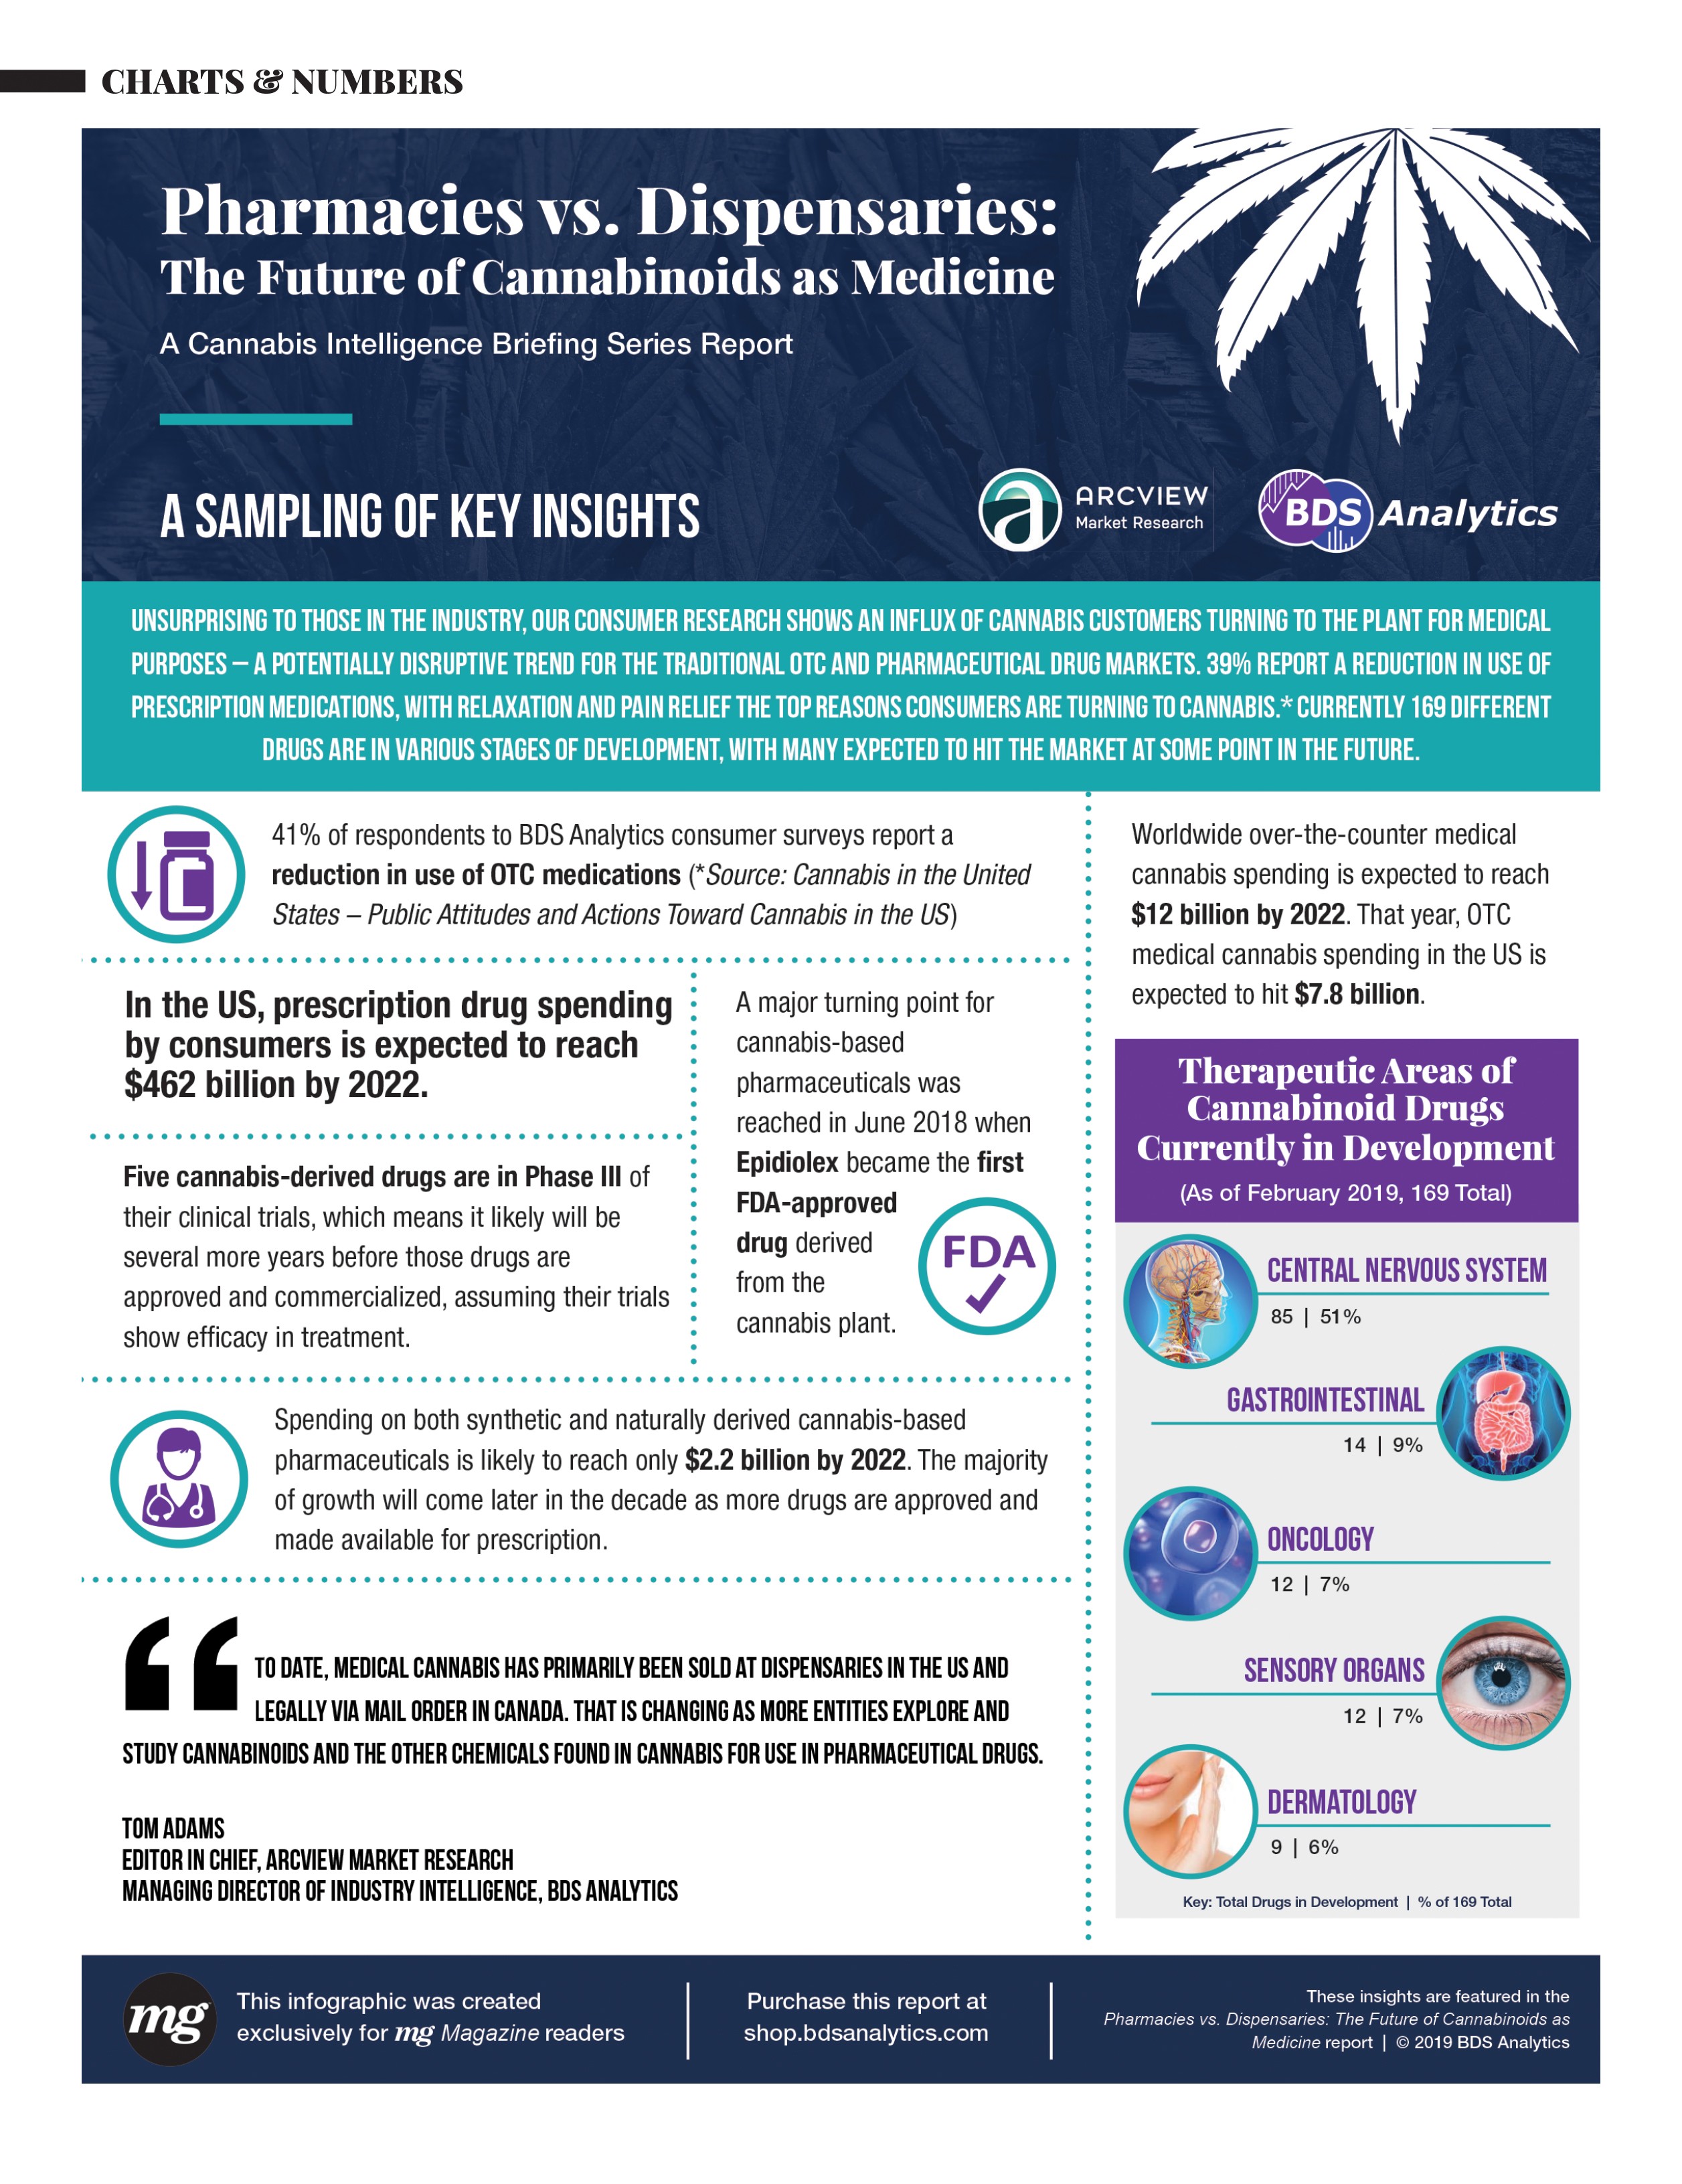 Infographic showing the future of cannabis versus pharmaceutical medicine